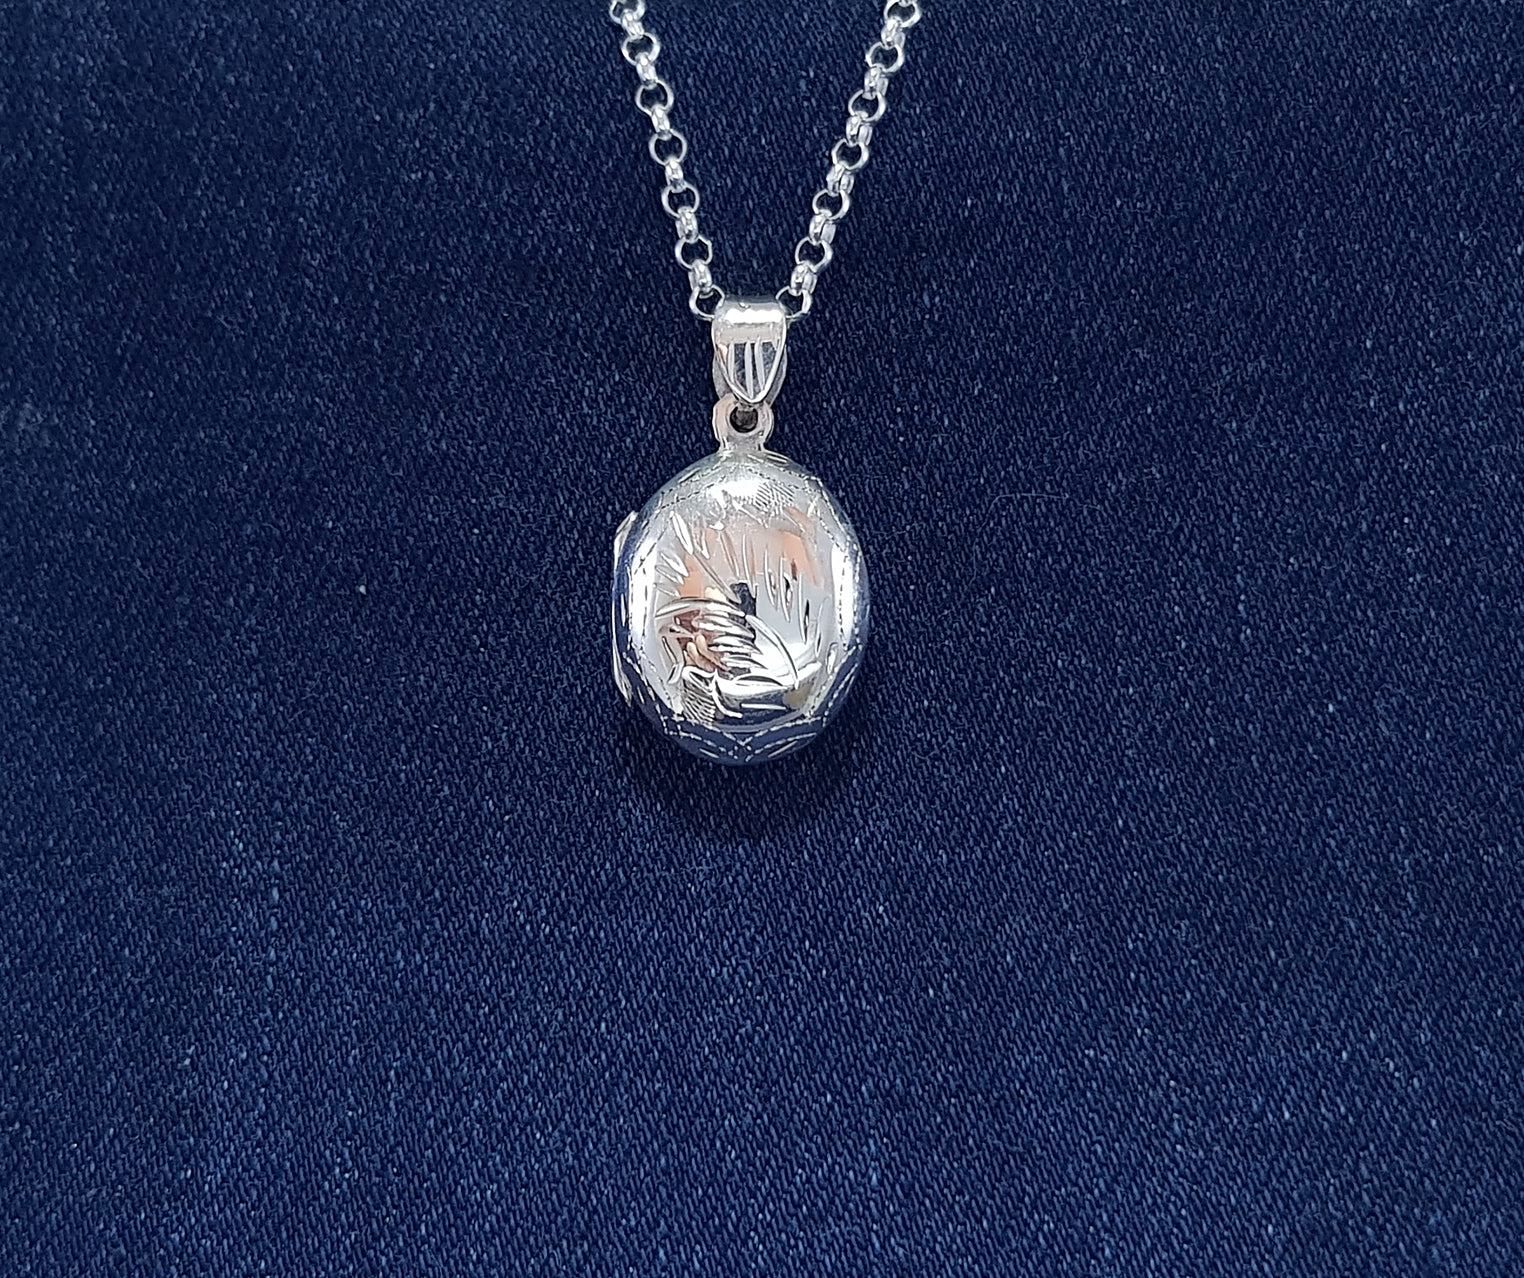 Silver Oval Locket with Engraving